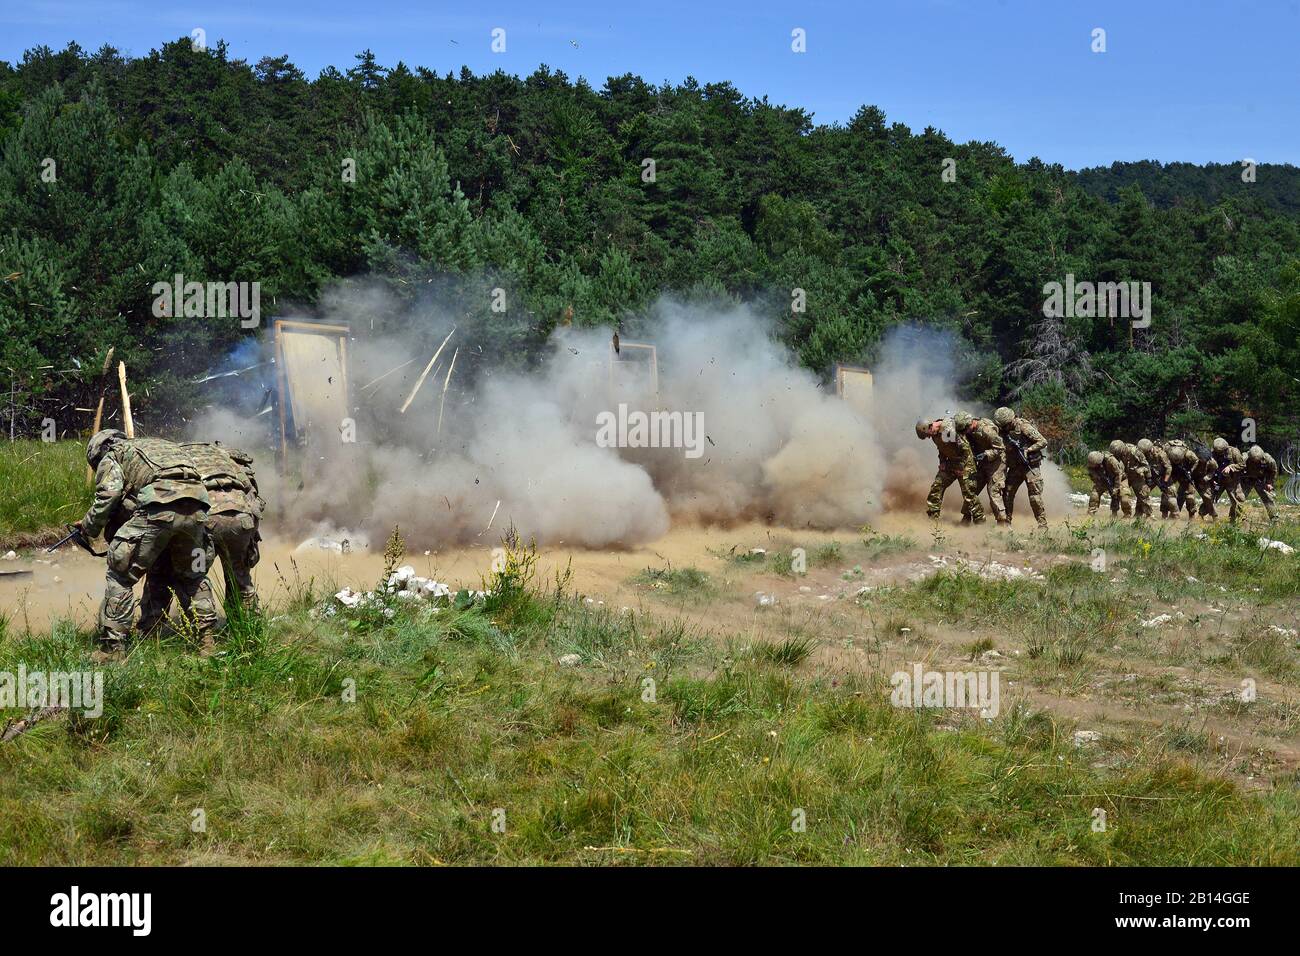 U.S. Army Paratroopers assigned to the 54th Brigade Engineer Battalion, 173rd Airborne Brigade, conduct urban breach training as part of Exercise Rock Knight at Pocek Range in Postonja, Slovenia, July 20, 2017. Exercise Rock Knight is a bilateral training exercise between the U.S. Army 173rd Airborne Brigade and the Slovenian Armed Forces, focused on small-unit tactics and building on previous lessons learned, forging the bonds and enhancing readiness between allied forces. The 173rd Airborne Brigade is the U.S. Army's Contingency Response Force in Europe, providing rapidly-deploying forces to Stock Photo